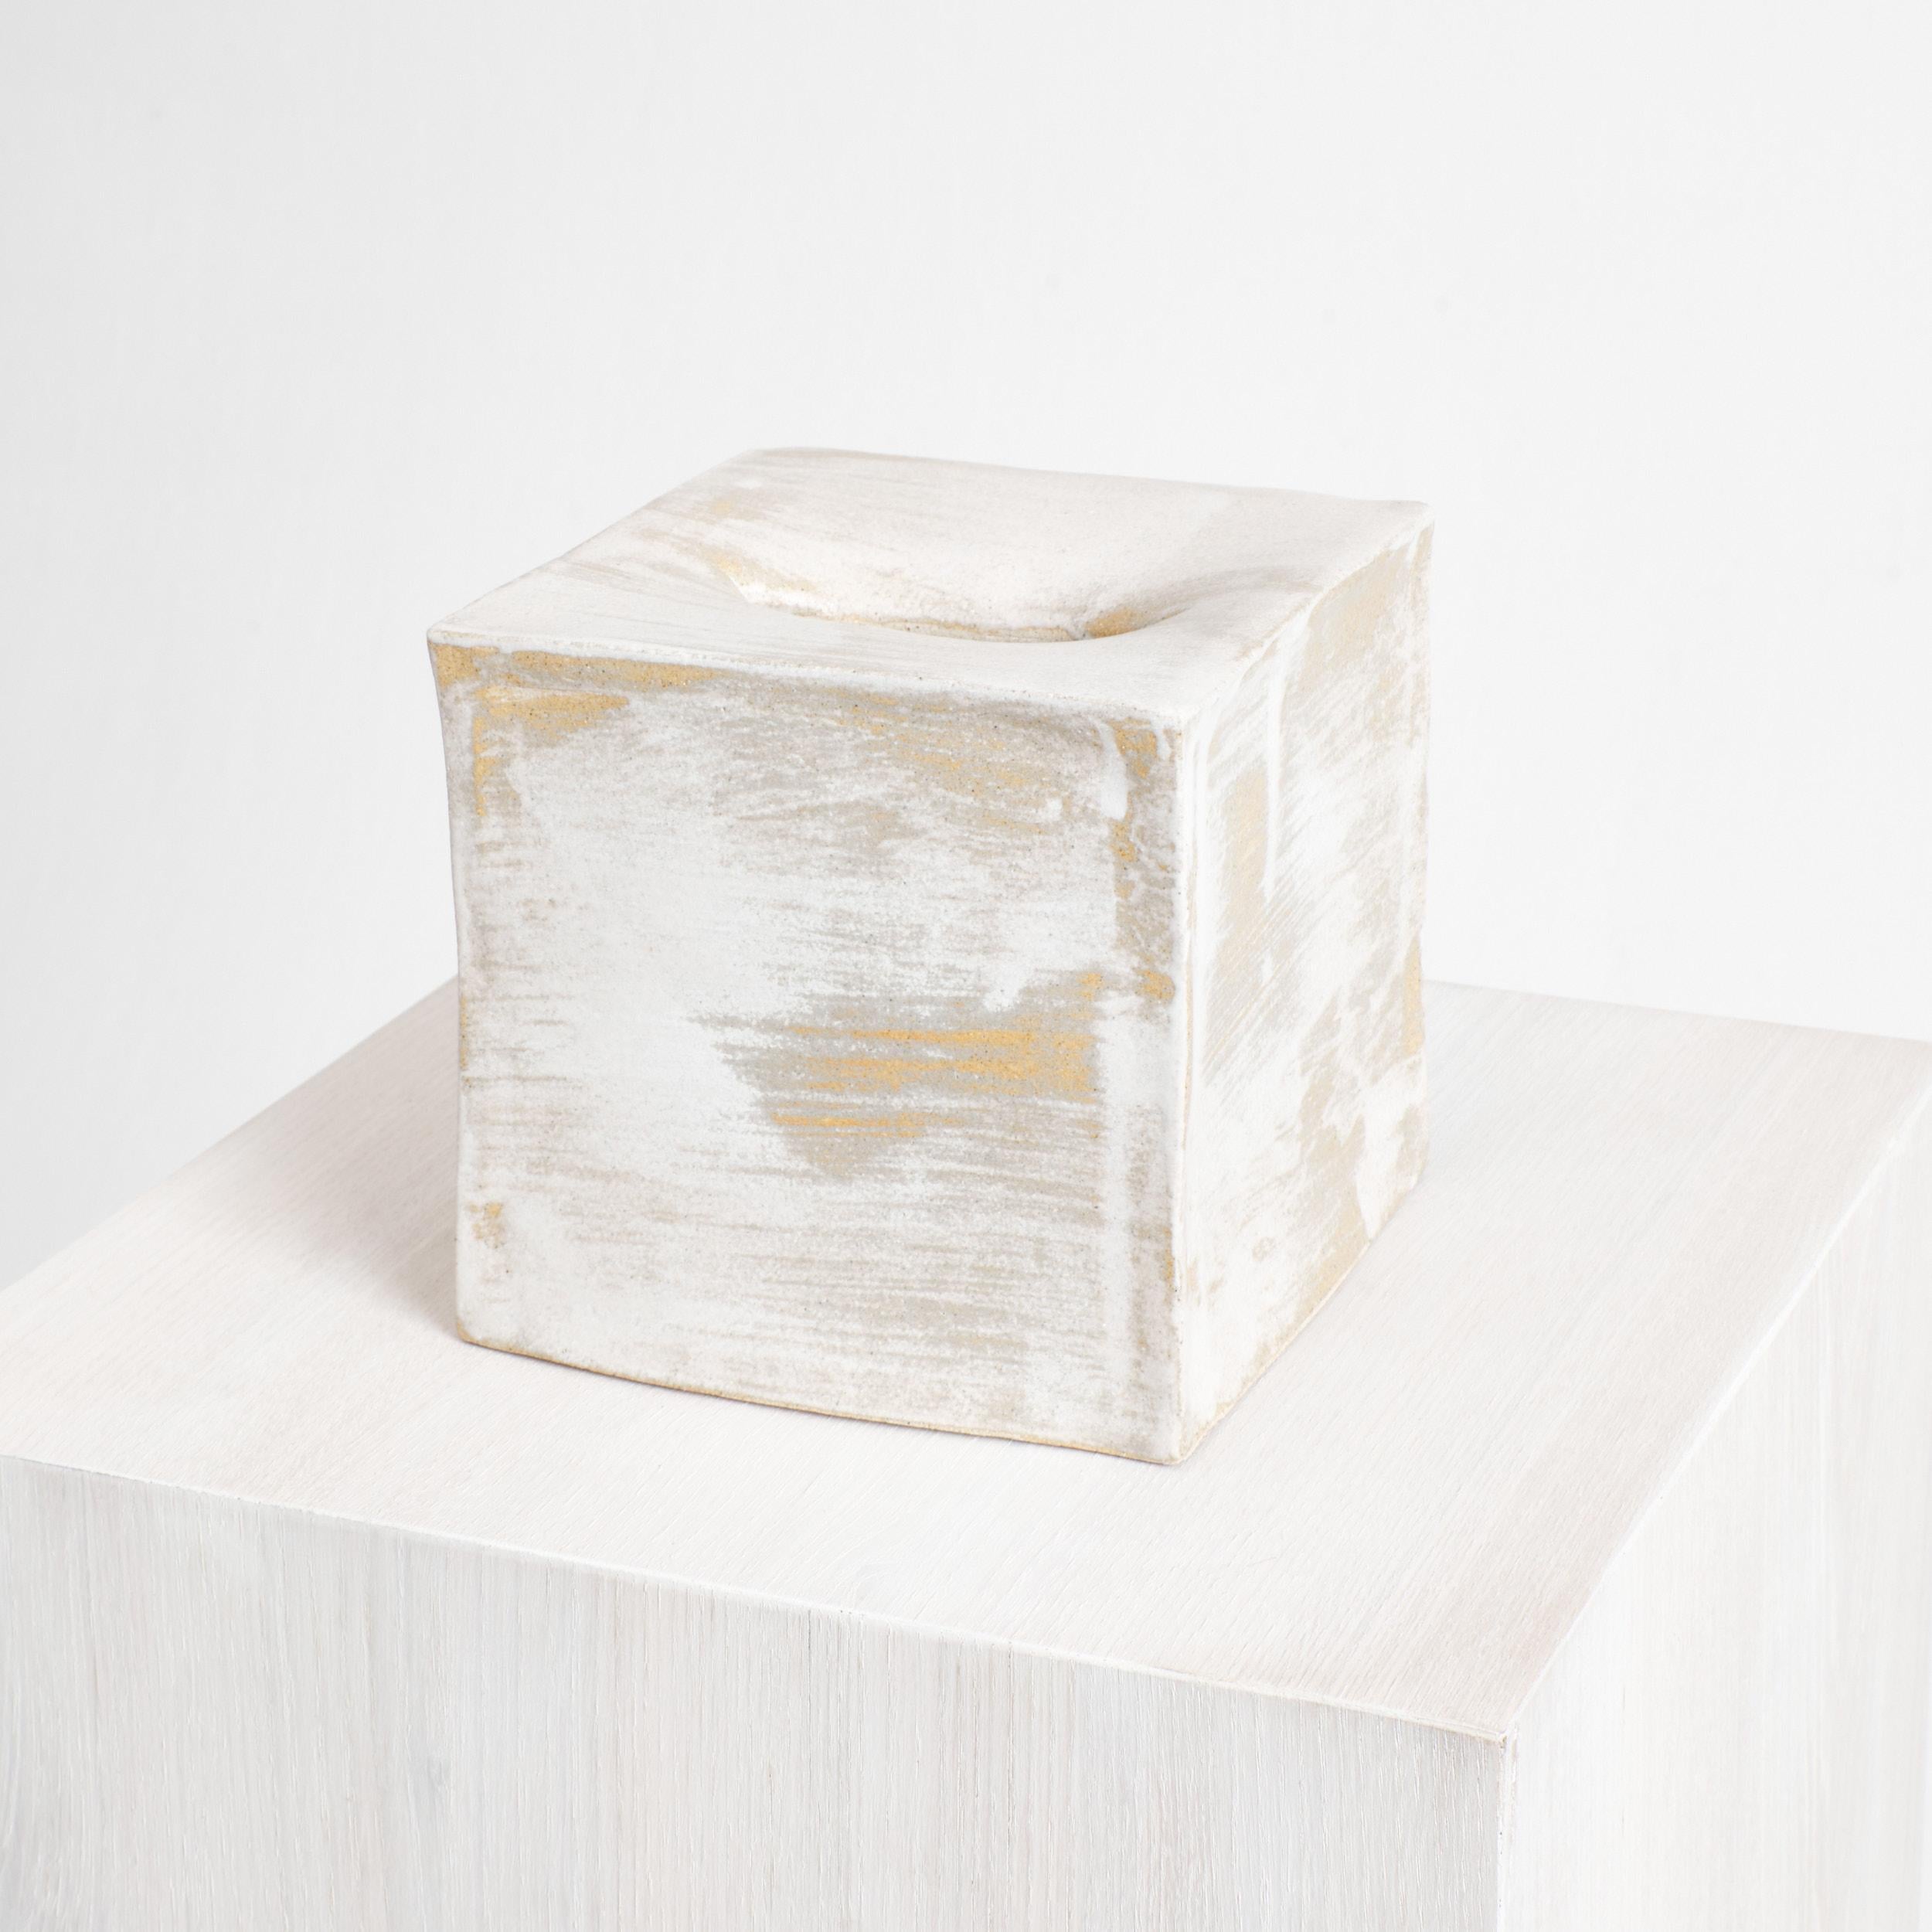 Hand-Crafted Ceramic Tissue Box square in White For Sale